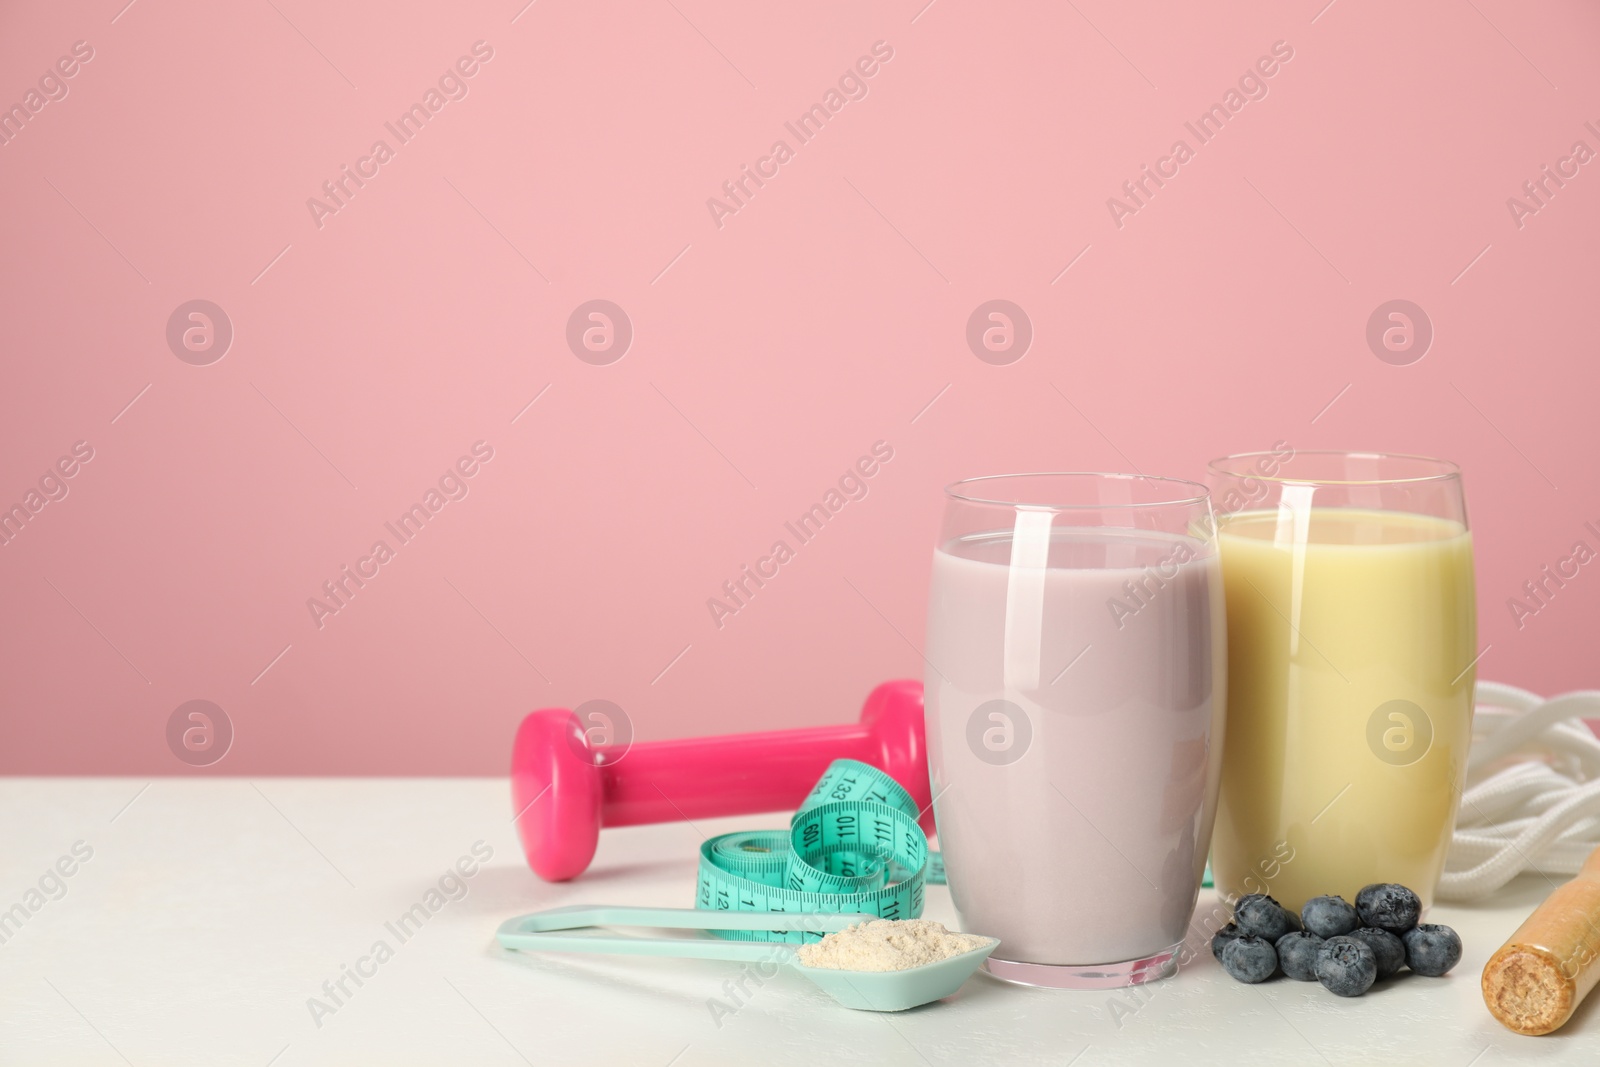 Photo of Tasty shakes with blueberries, sports equipment, measuring tape and powder on white table against pink background, space for text. Weight loss